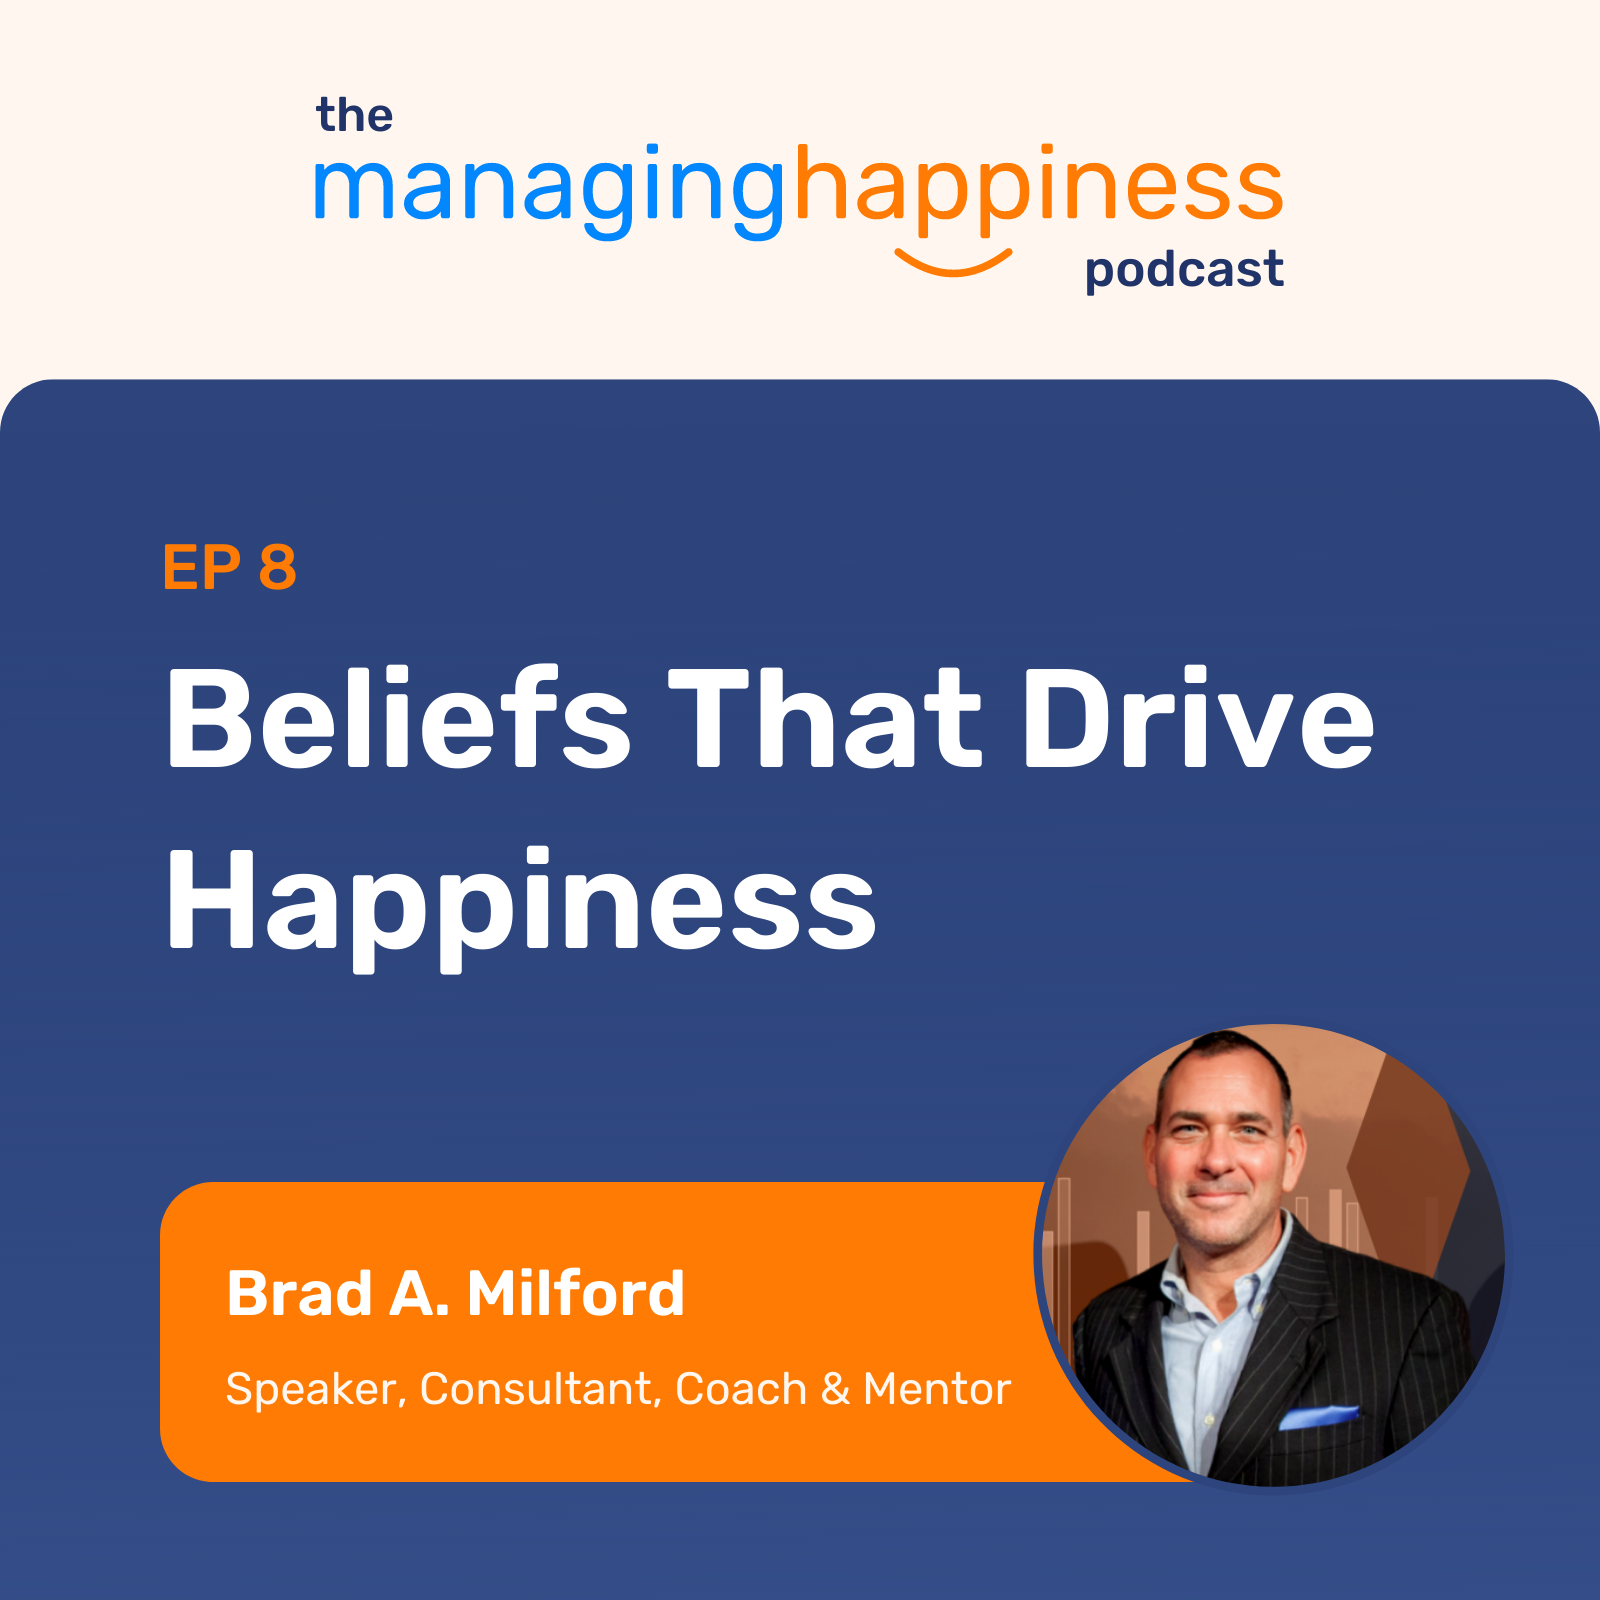 “Beliefs That Drive Happiness” with Brad Milford